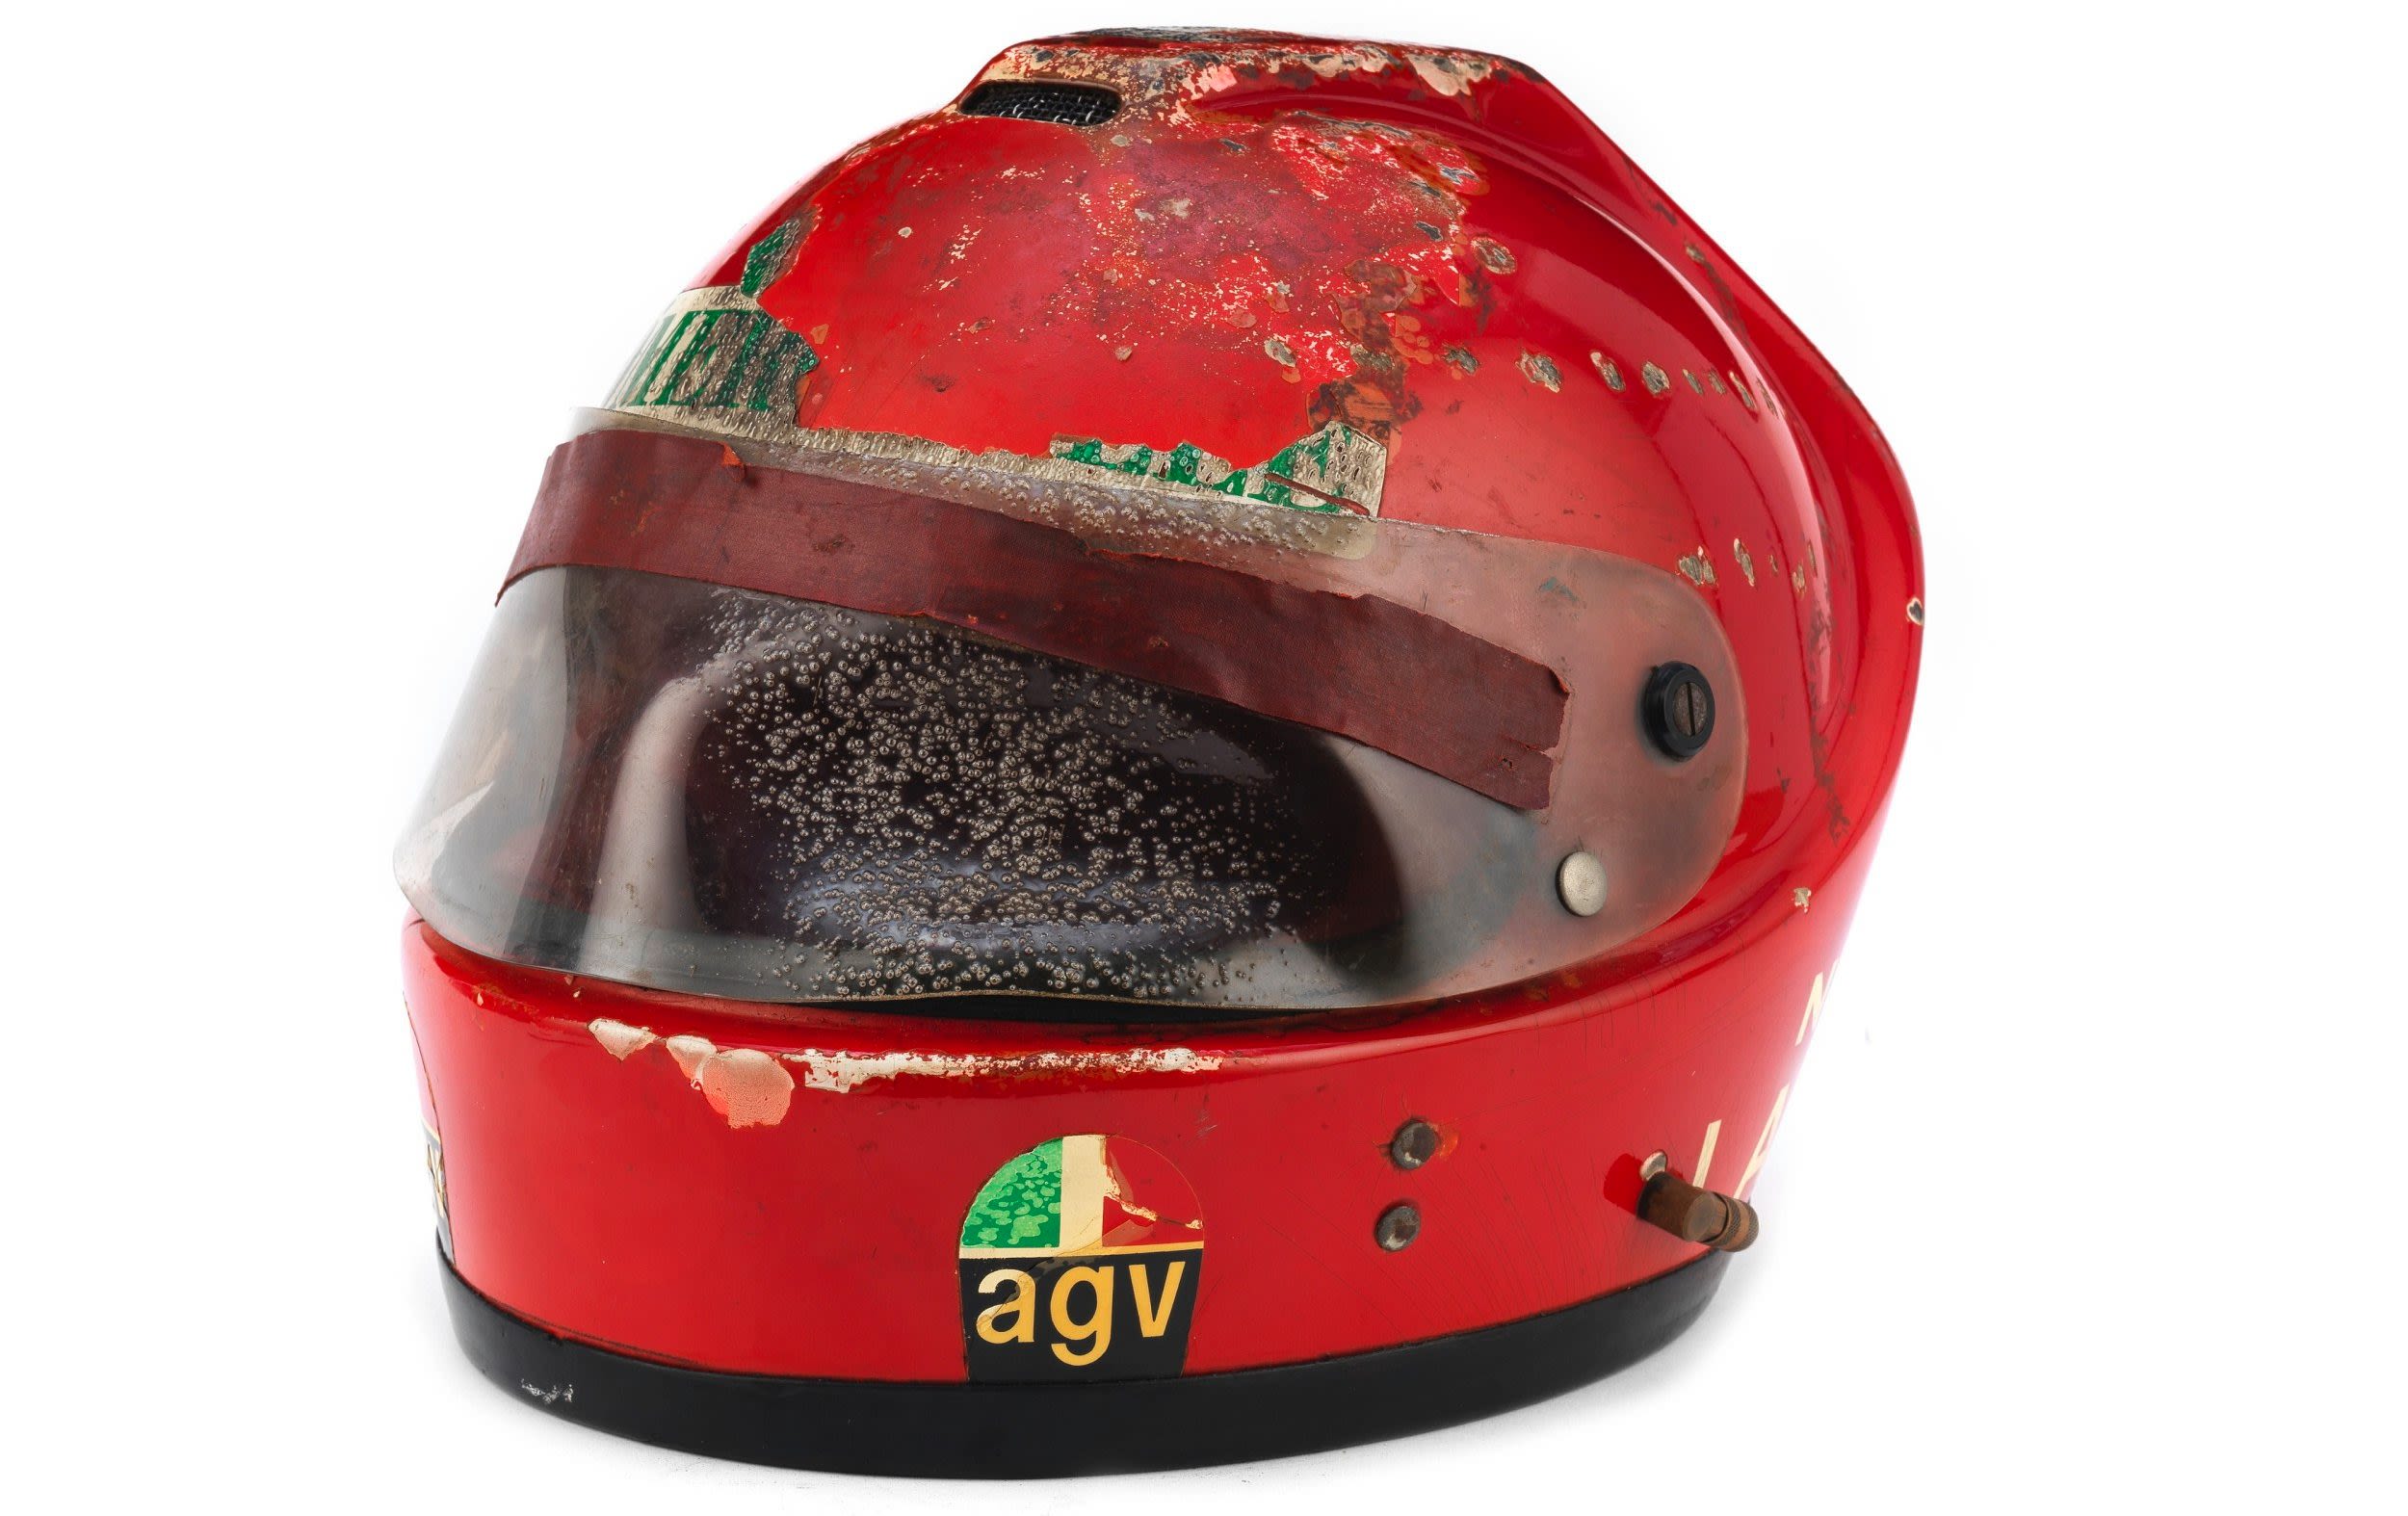 Niki Lauda’s burnt helmet from near-fatal accident to fetch up to $60,000 at auction